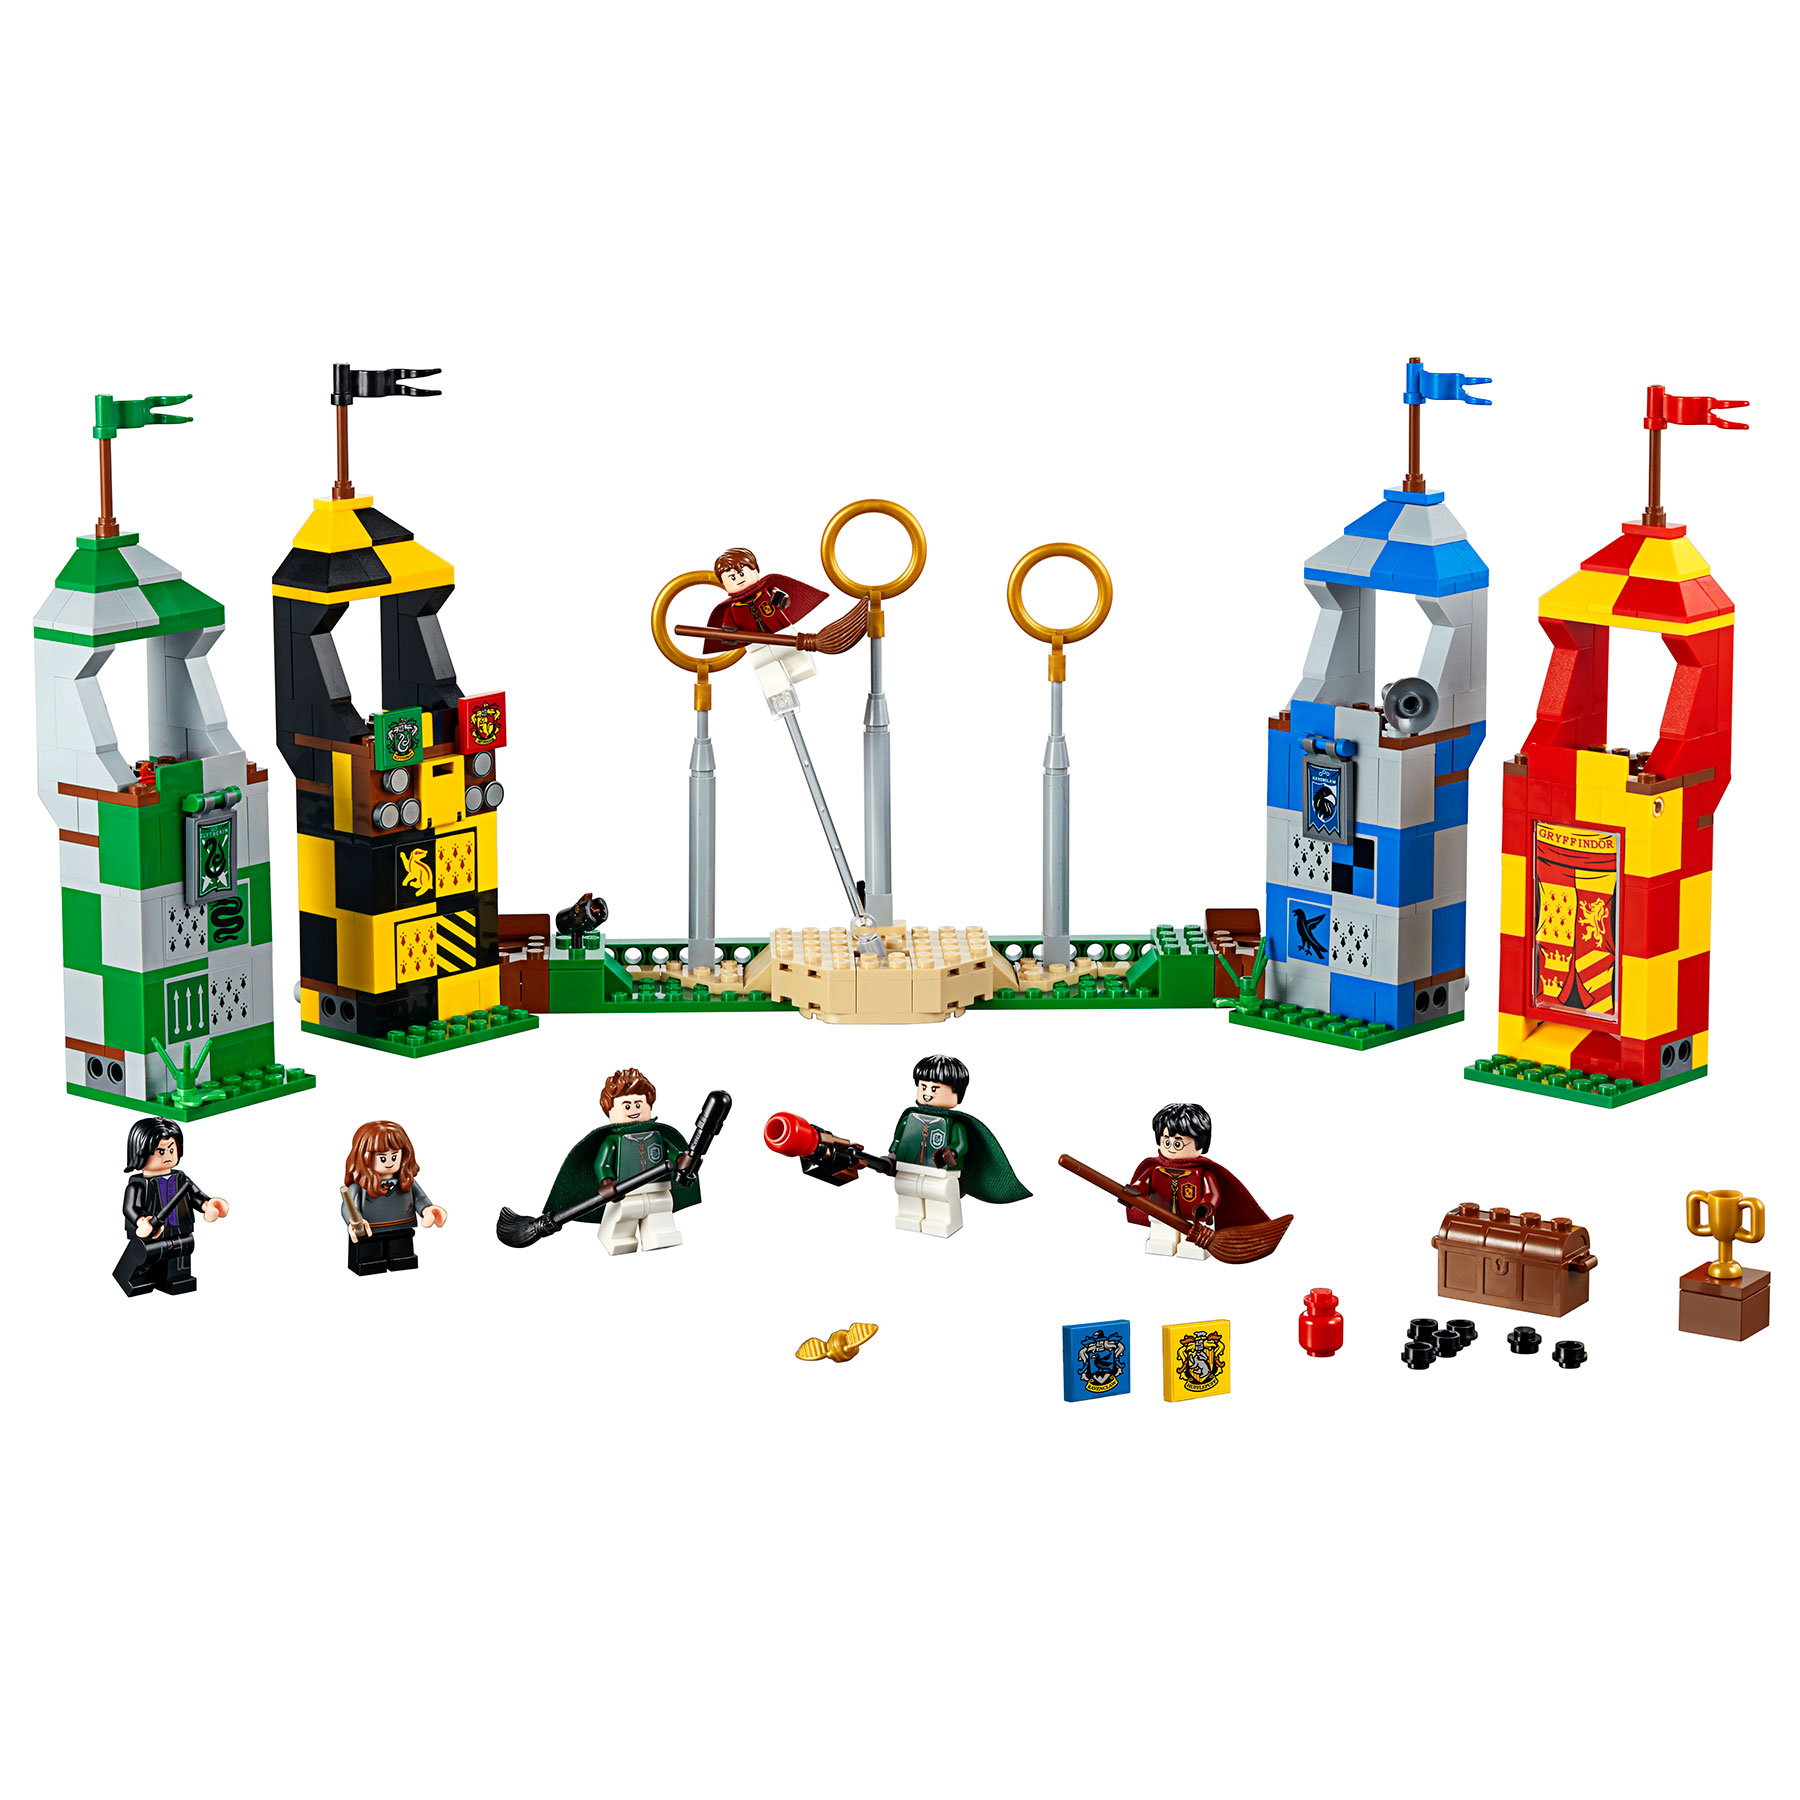 All New Harry Potter LEGO Sets Revealed - The-Leaky-Cauldron.org Â« The-Leaky-Cauldron.org